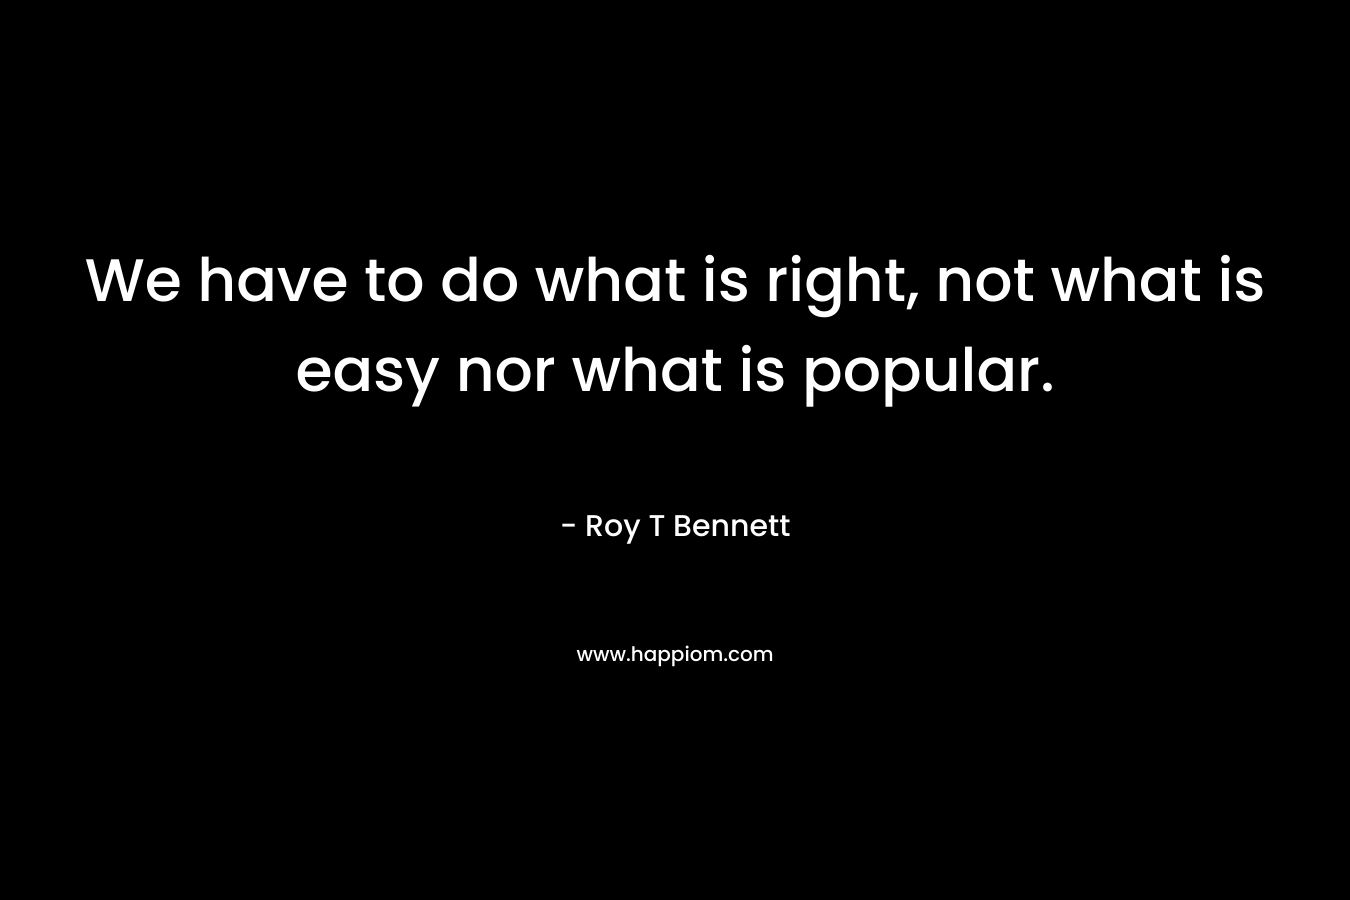 We have to do what is right, not what is easy nor what is popular. – Roy T Bennett